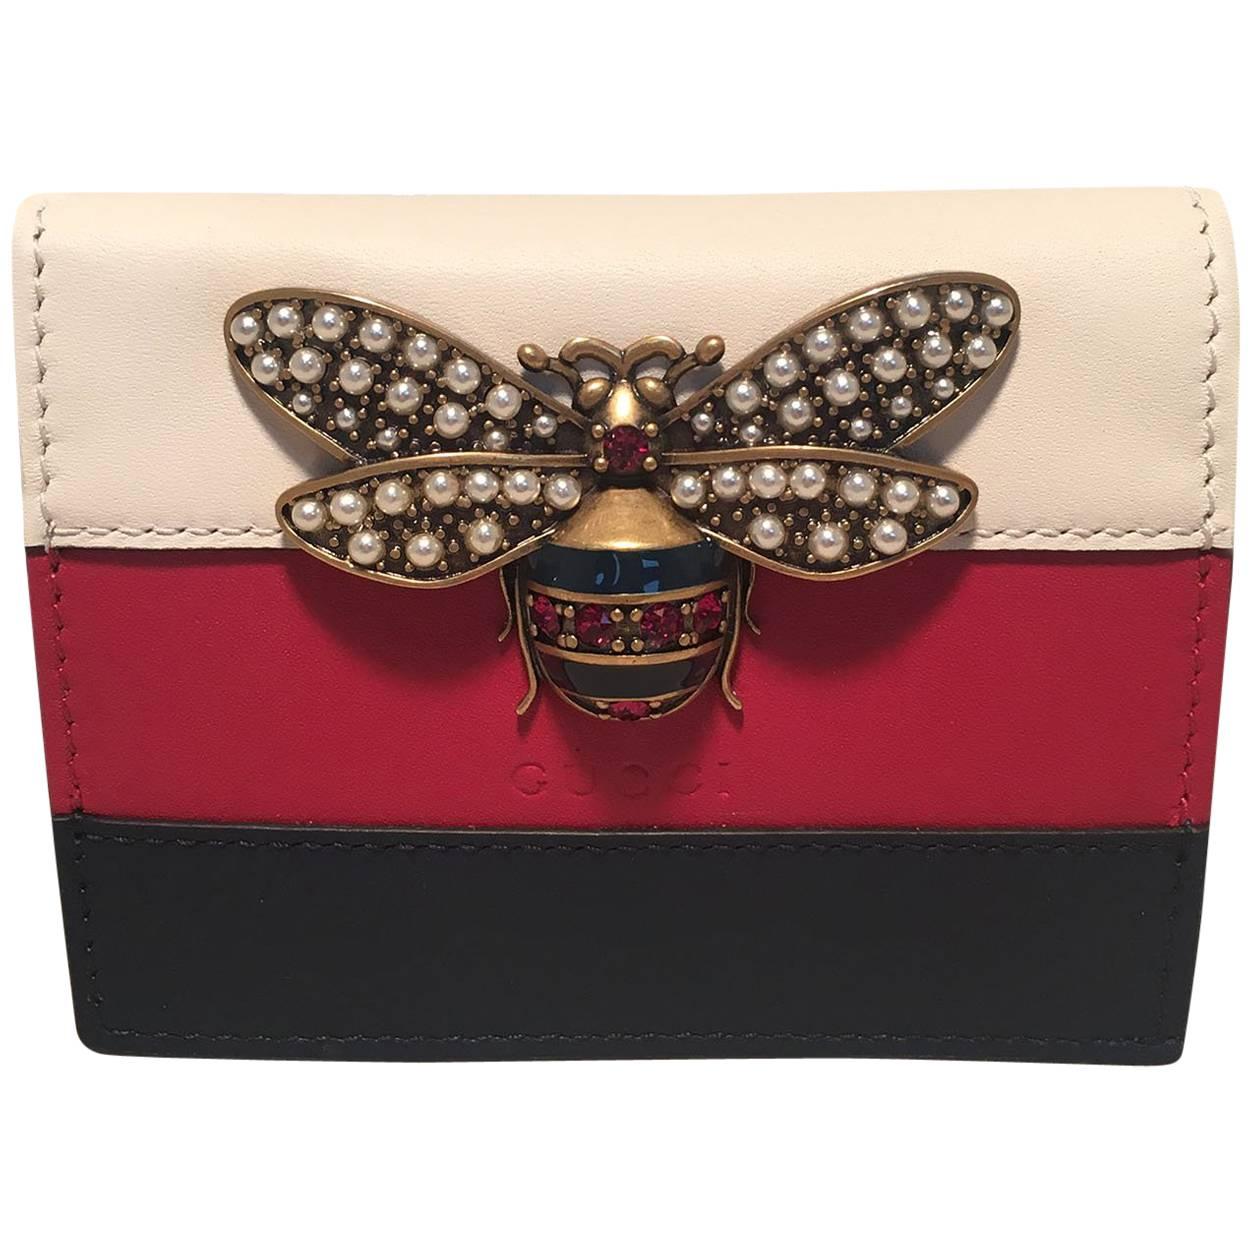 NWOT Gucci Small Striped Leather Embellished Bee Wallet